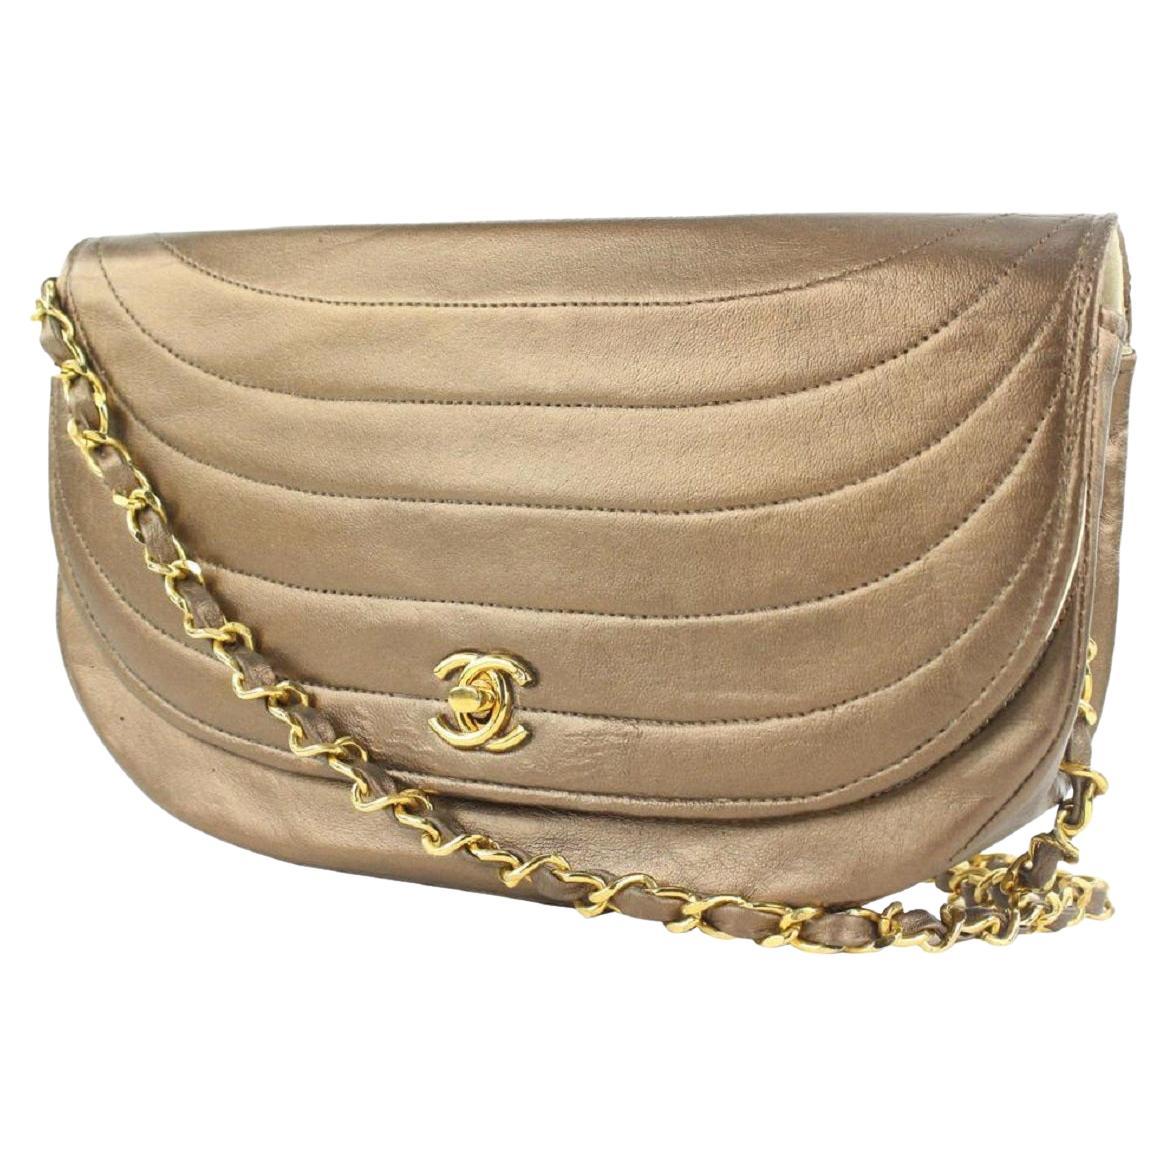 CHANEL Shoulder Bags for Women with Chain Strap, Authenticity Guaranteed